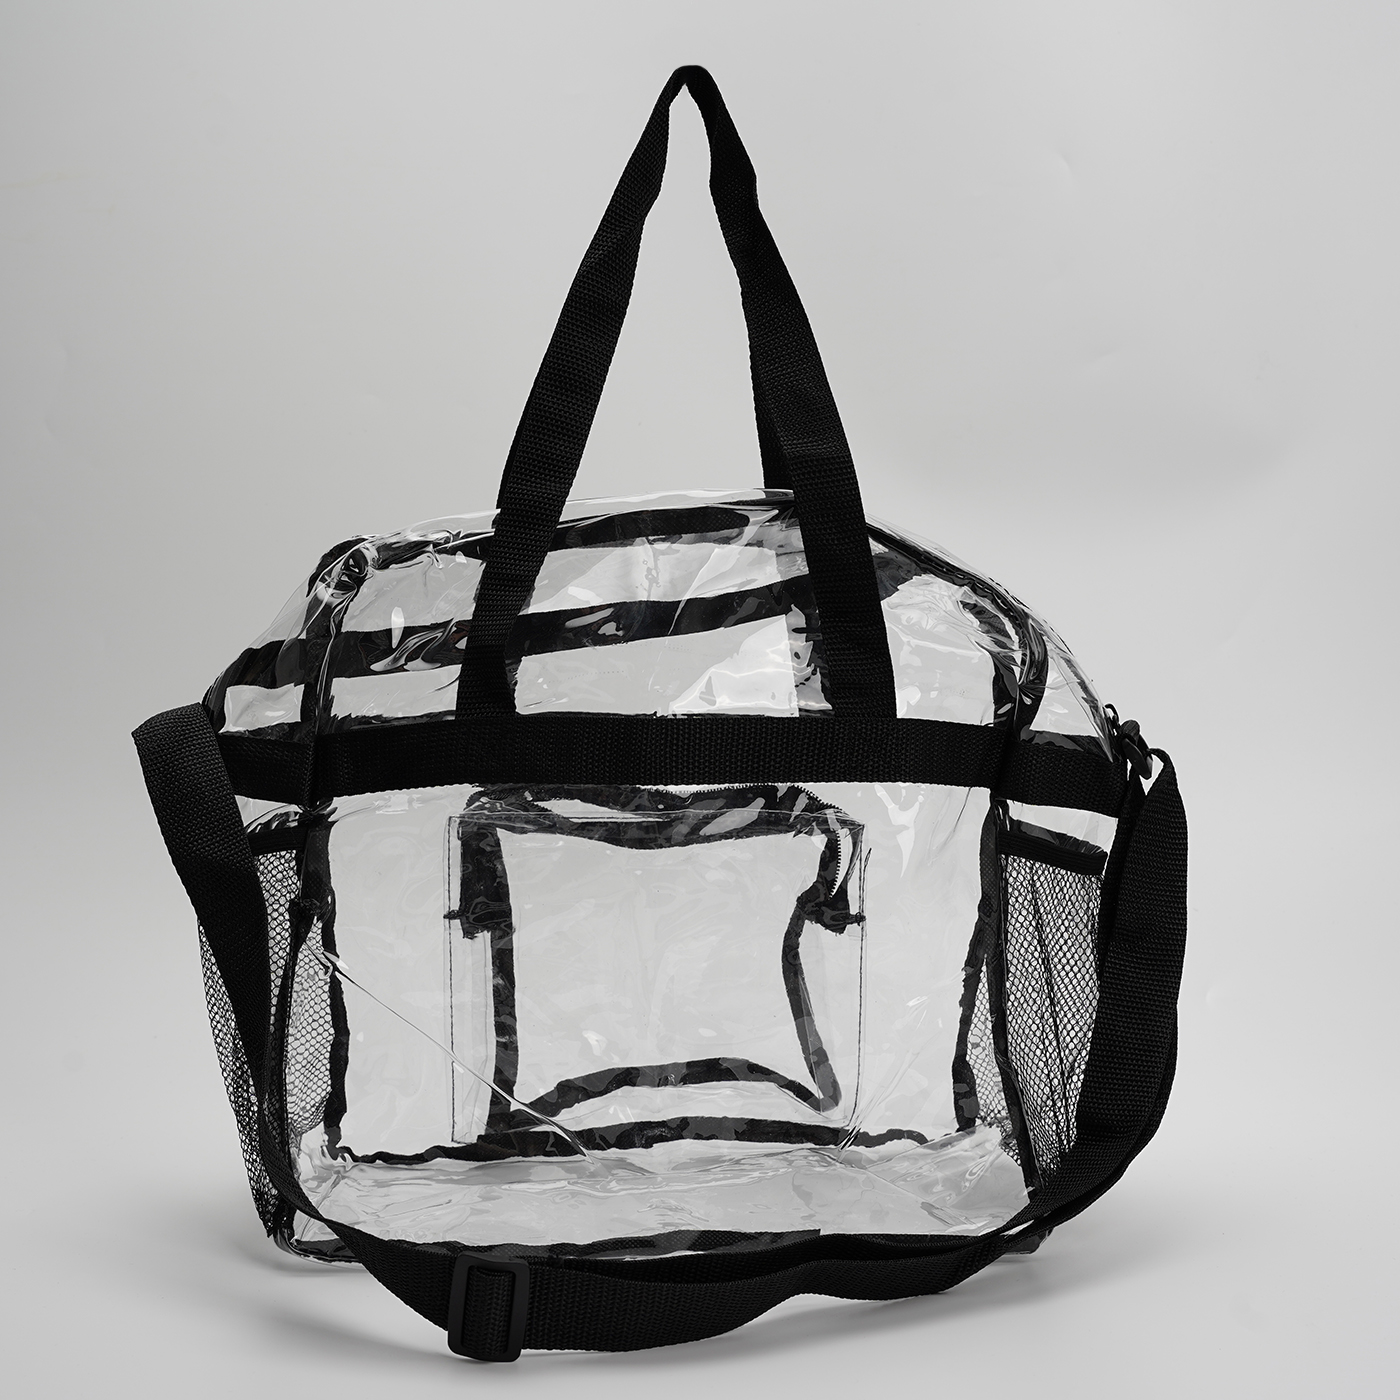 Large Capacity Clear Bag With Shoulder Strap4